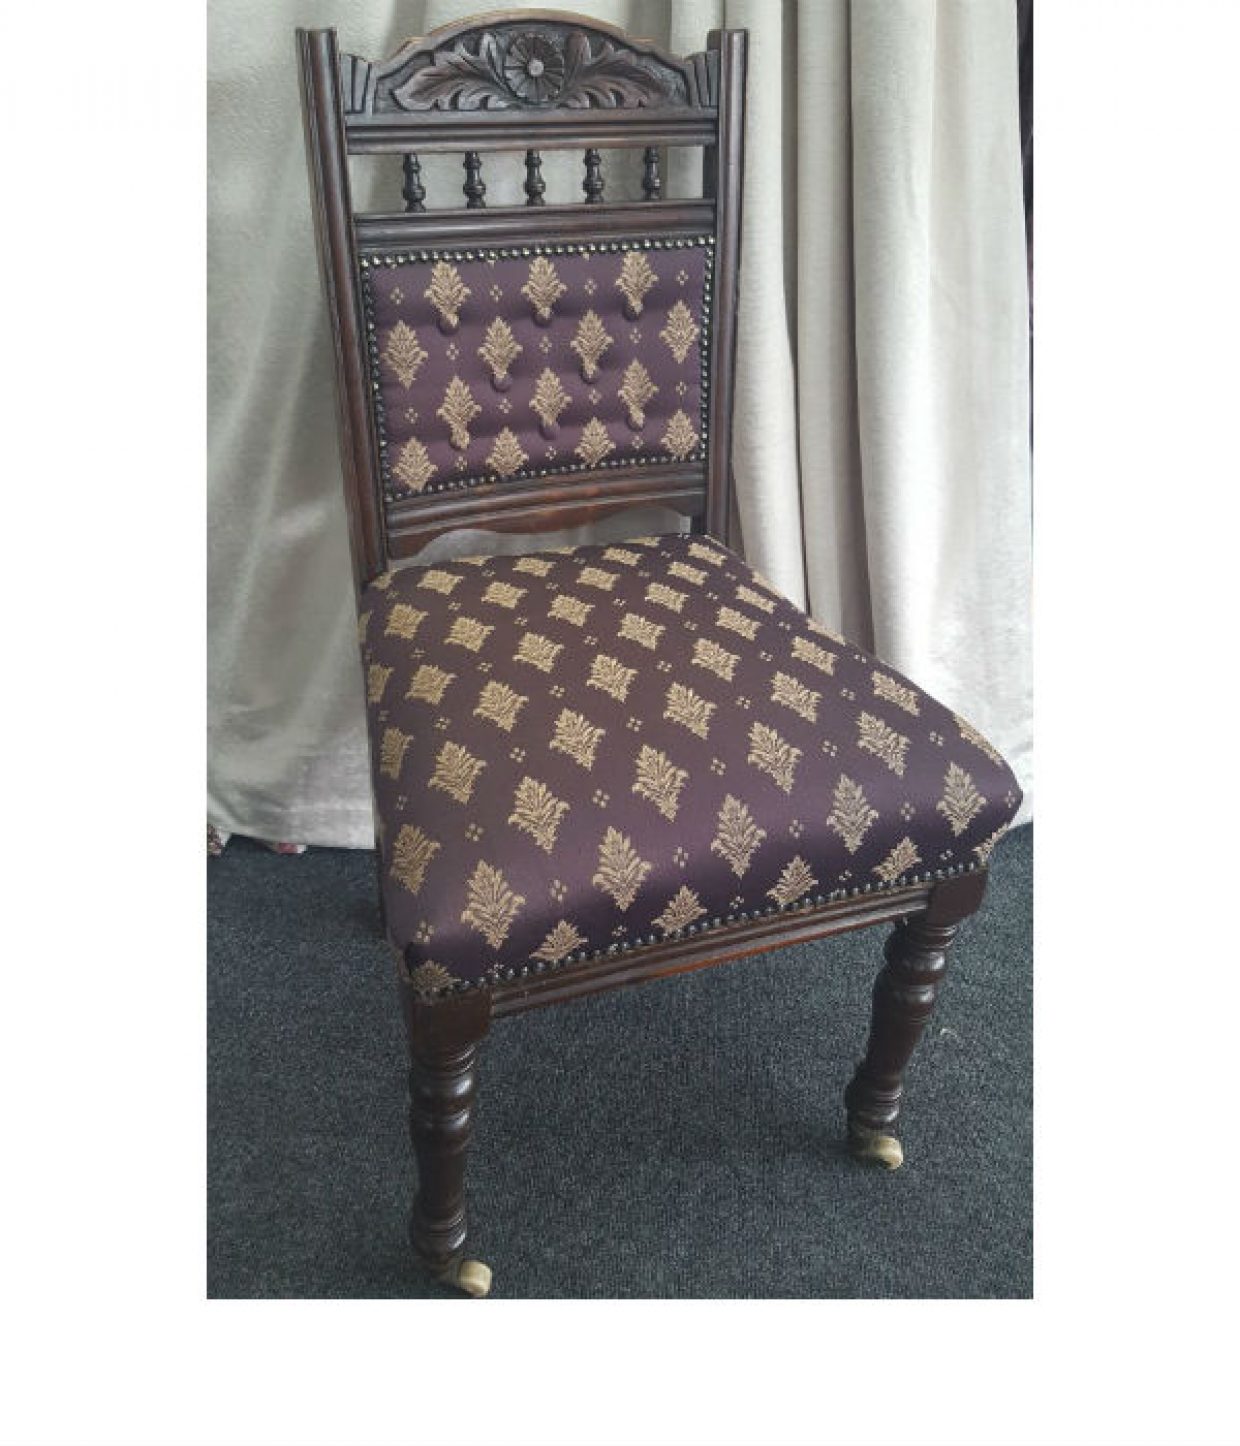 Antique Chair Reupholstery project